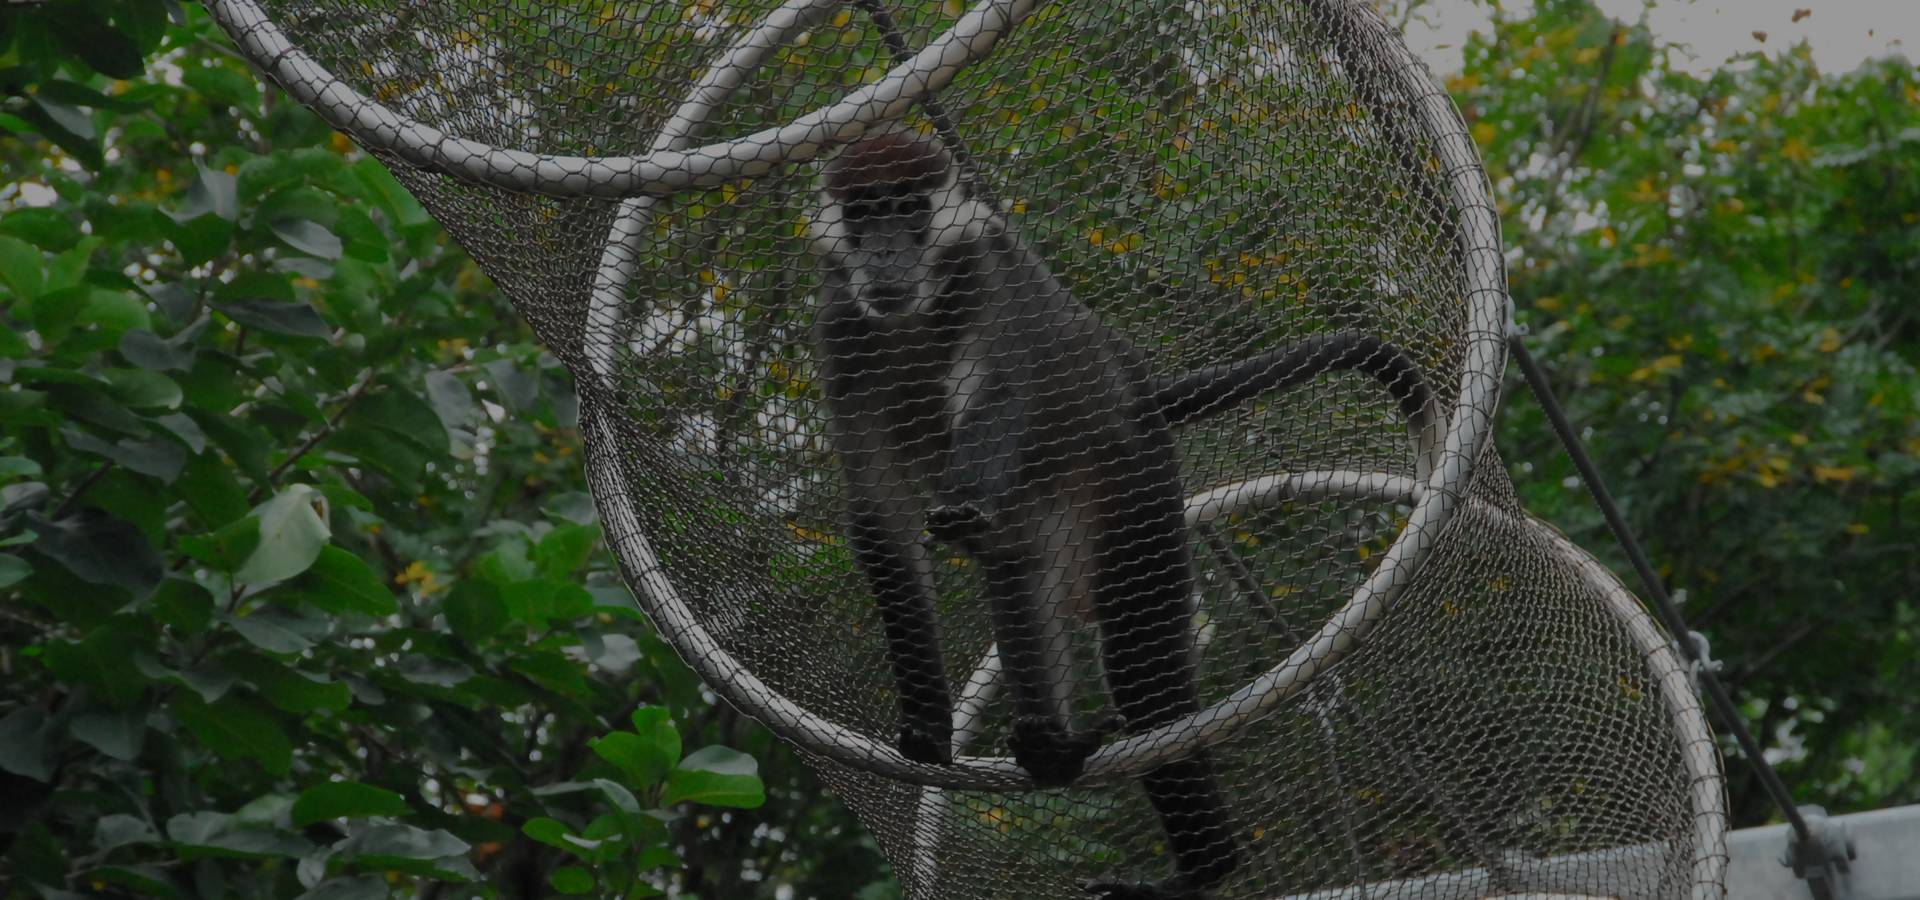 There is a monkey in rope mesh passageway.